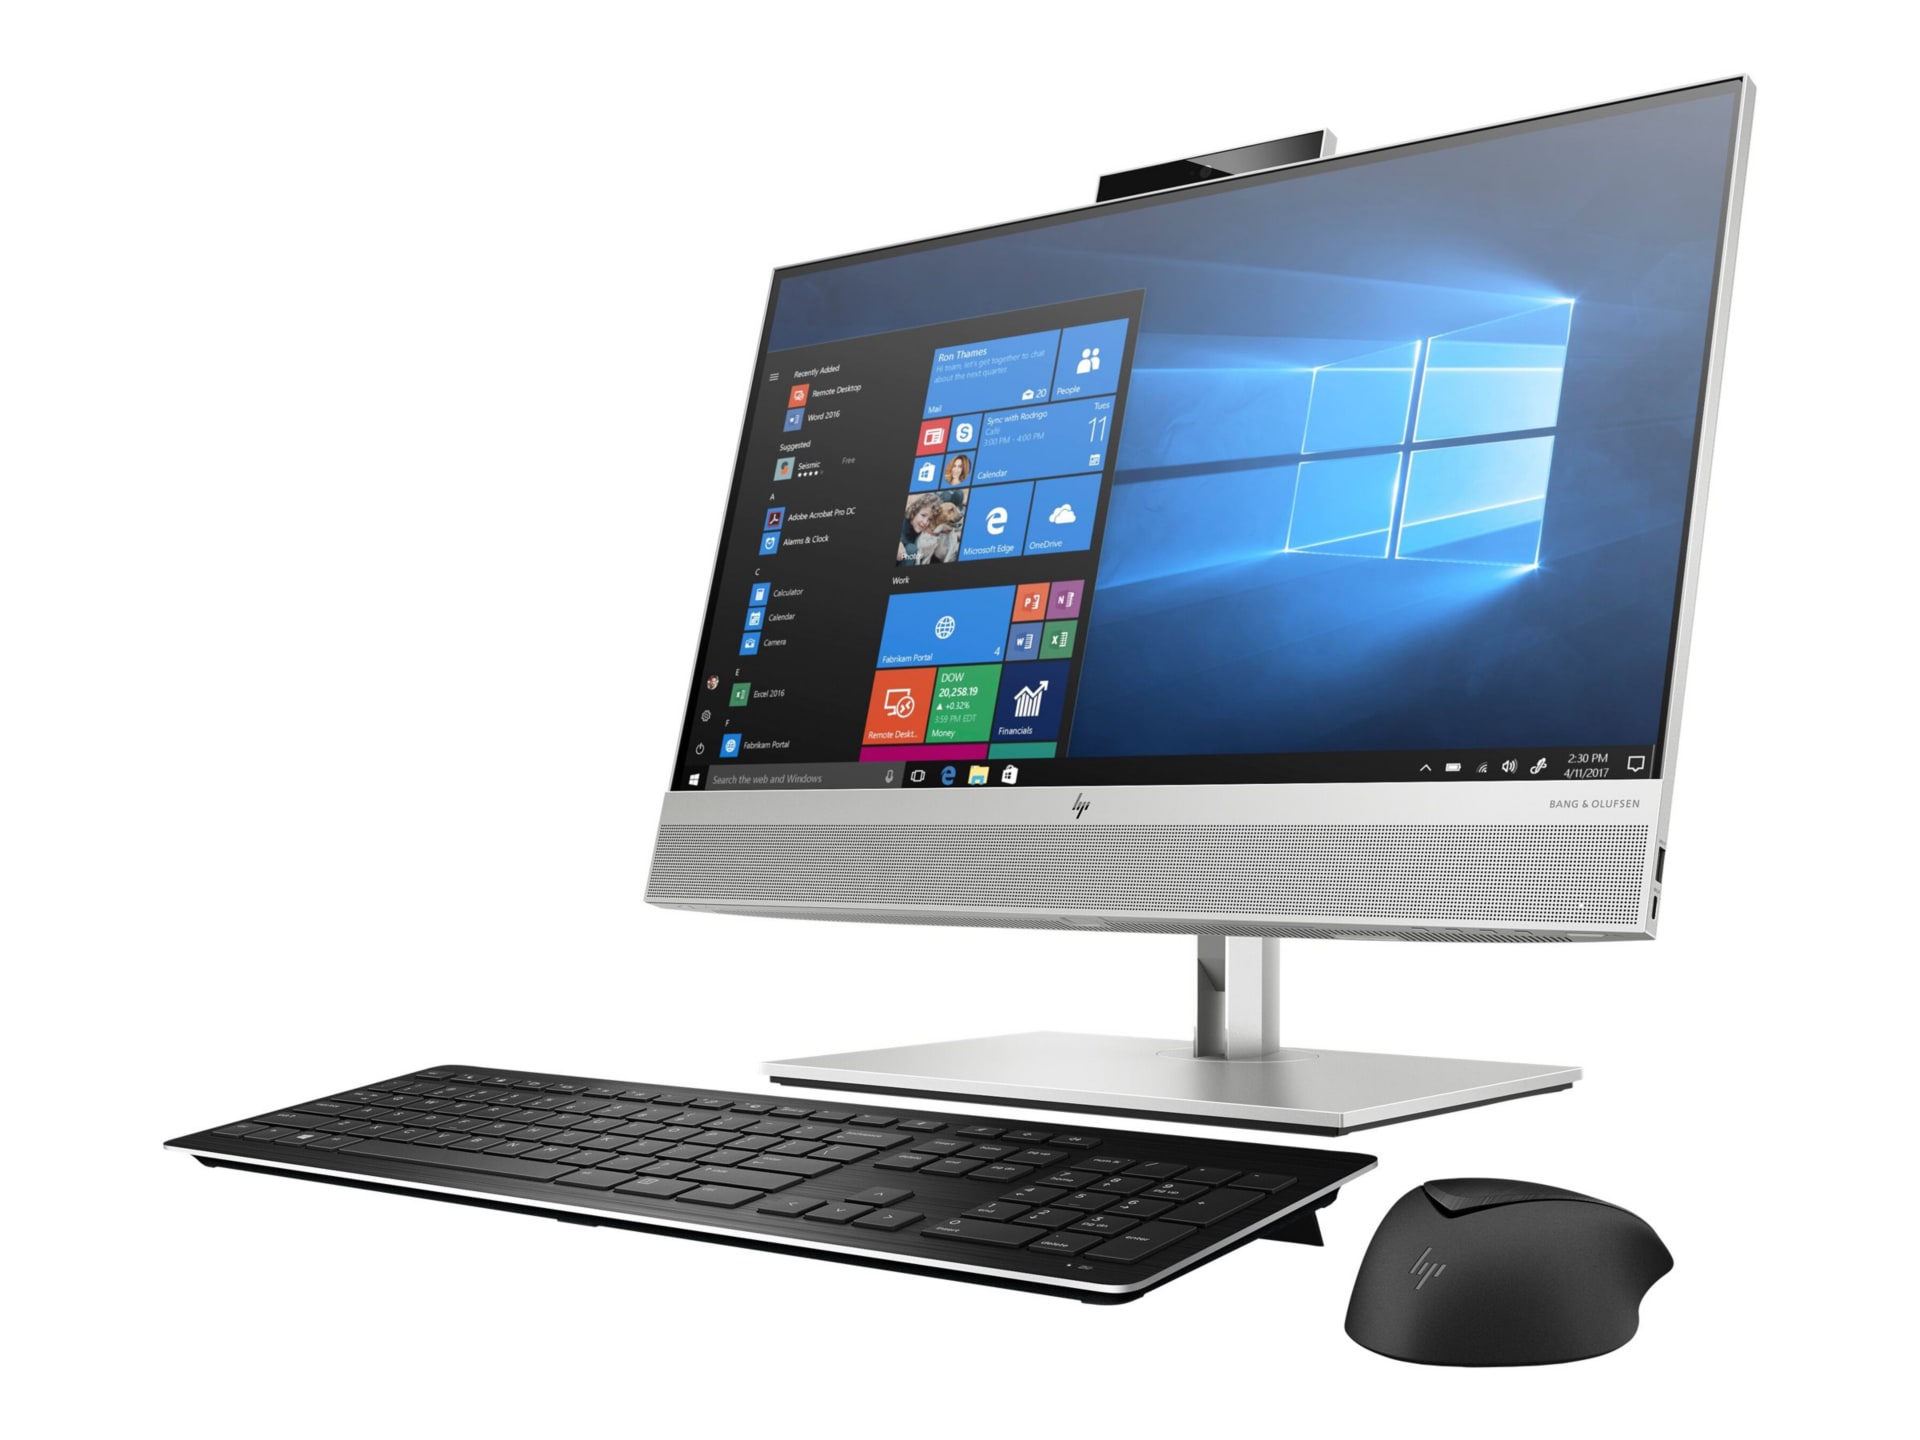 HP EliteOne 800 G6 All-in-One Computer - Intel Core i5 10th Gen i5-10500 He